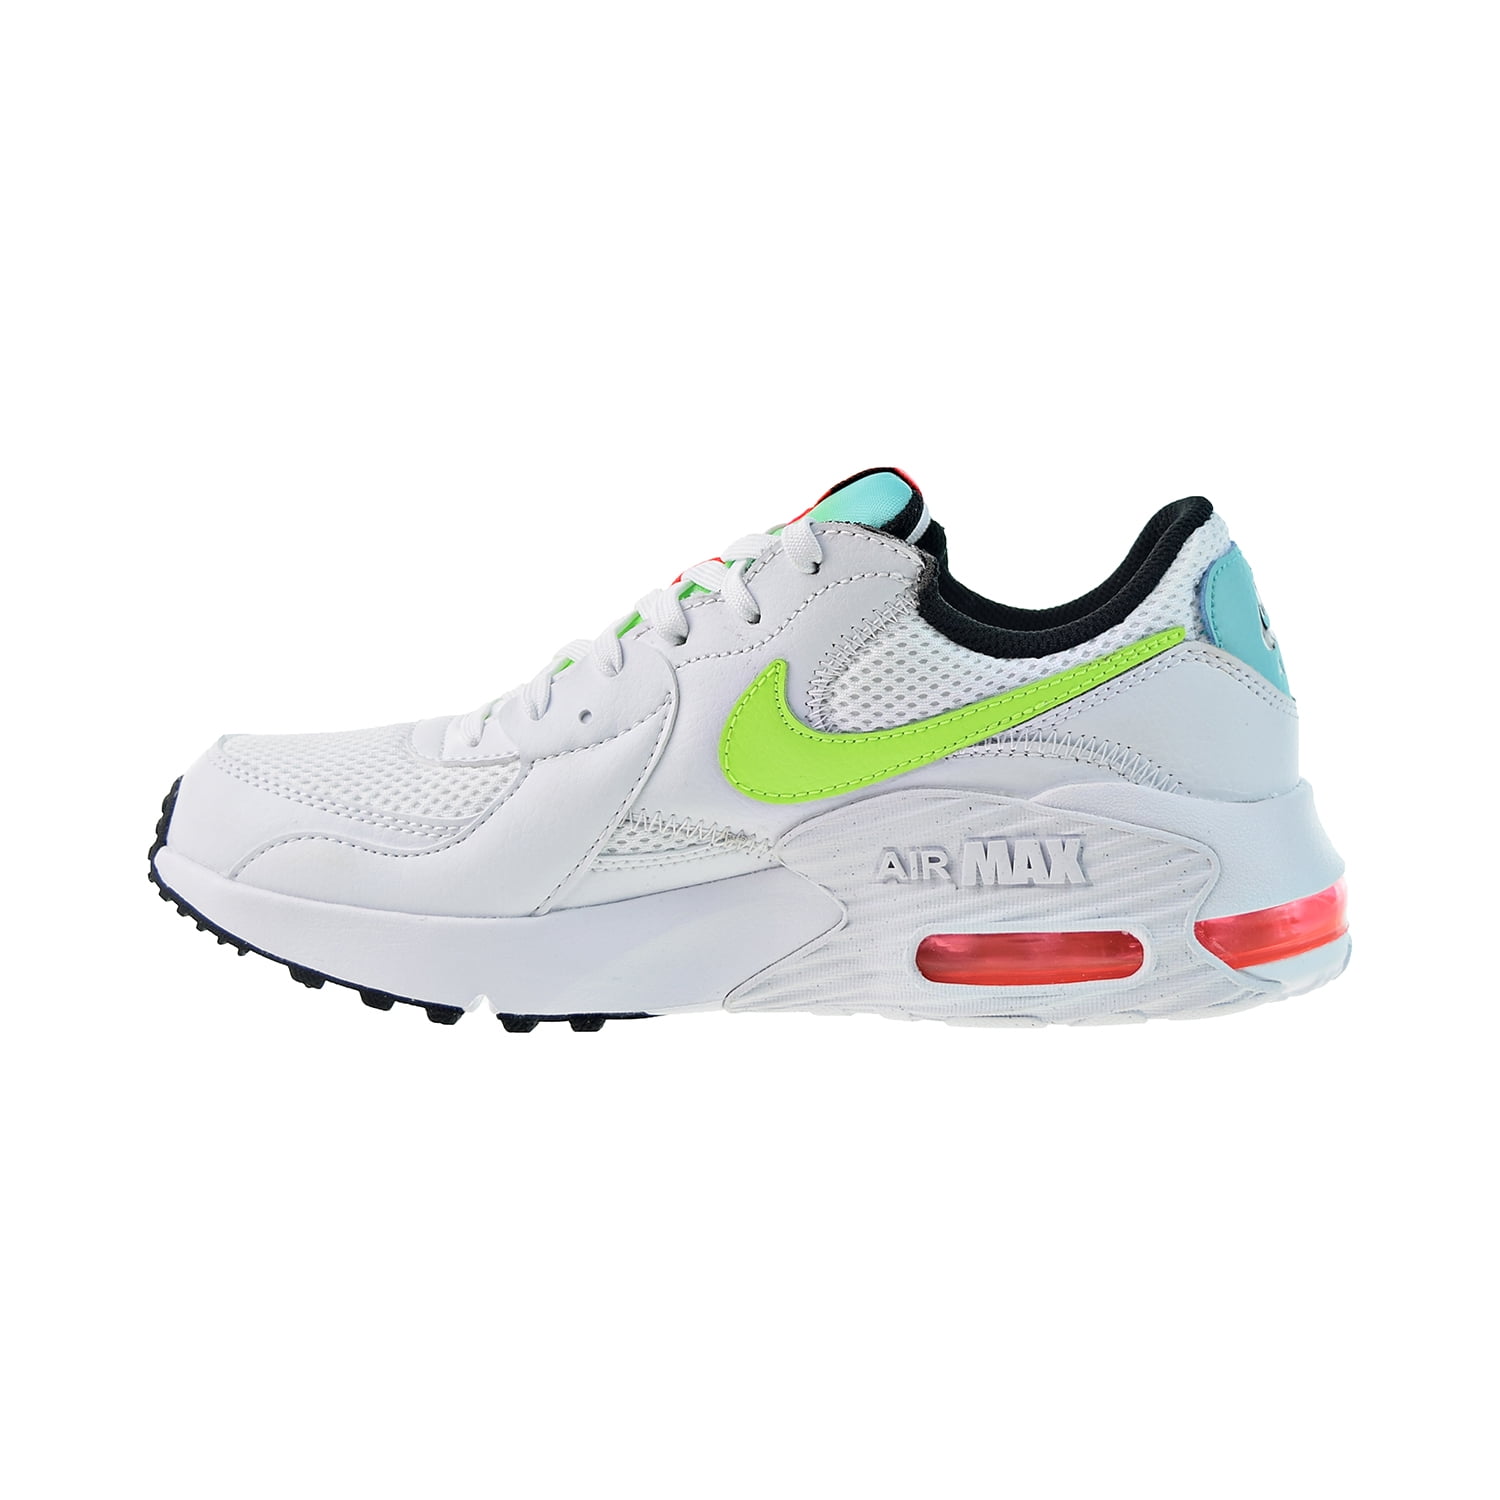 Nike Air Max Excee Women's Shoes White-Volt Black cw5606-100